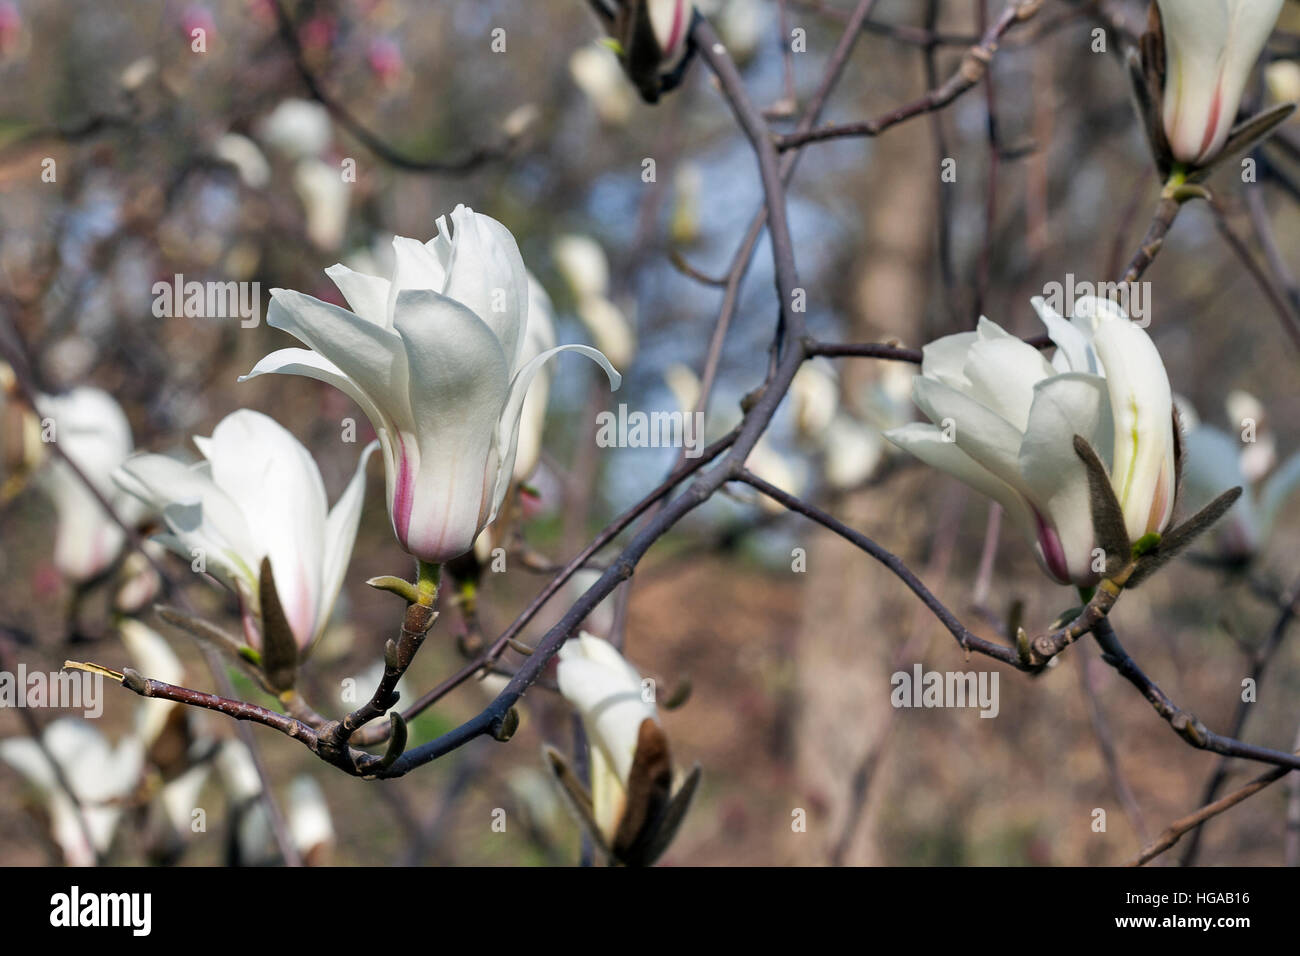 White magnolia branch with spring blooming flowers and buds closeup. Stock Photo